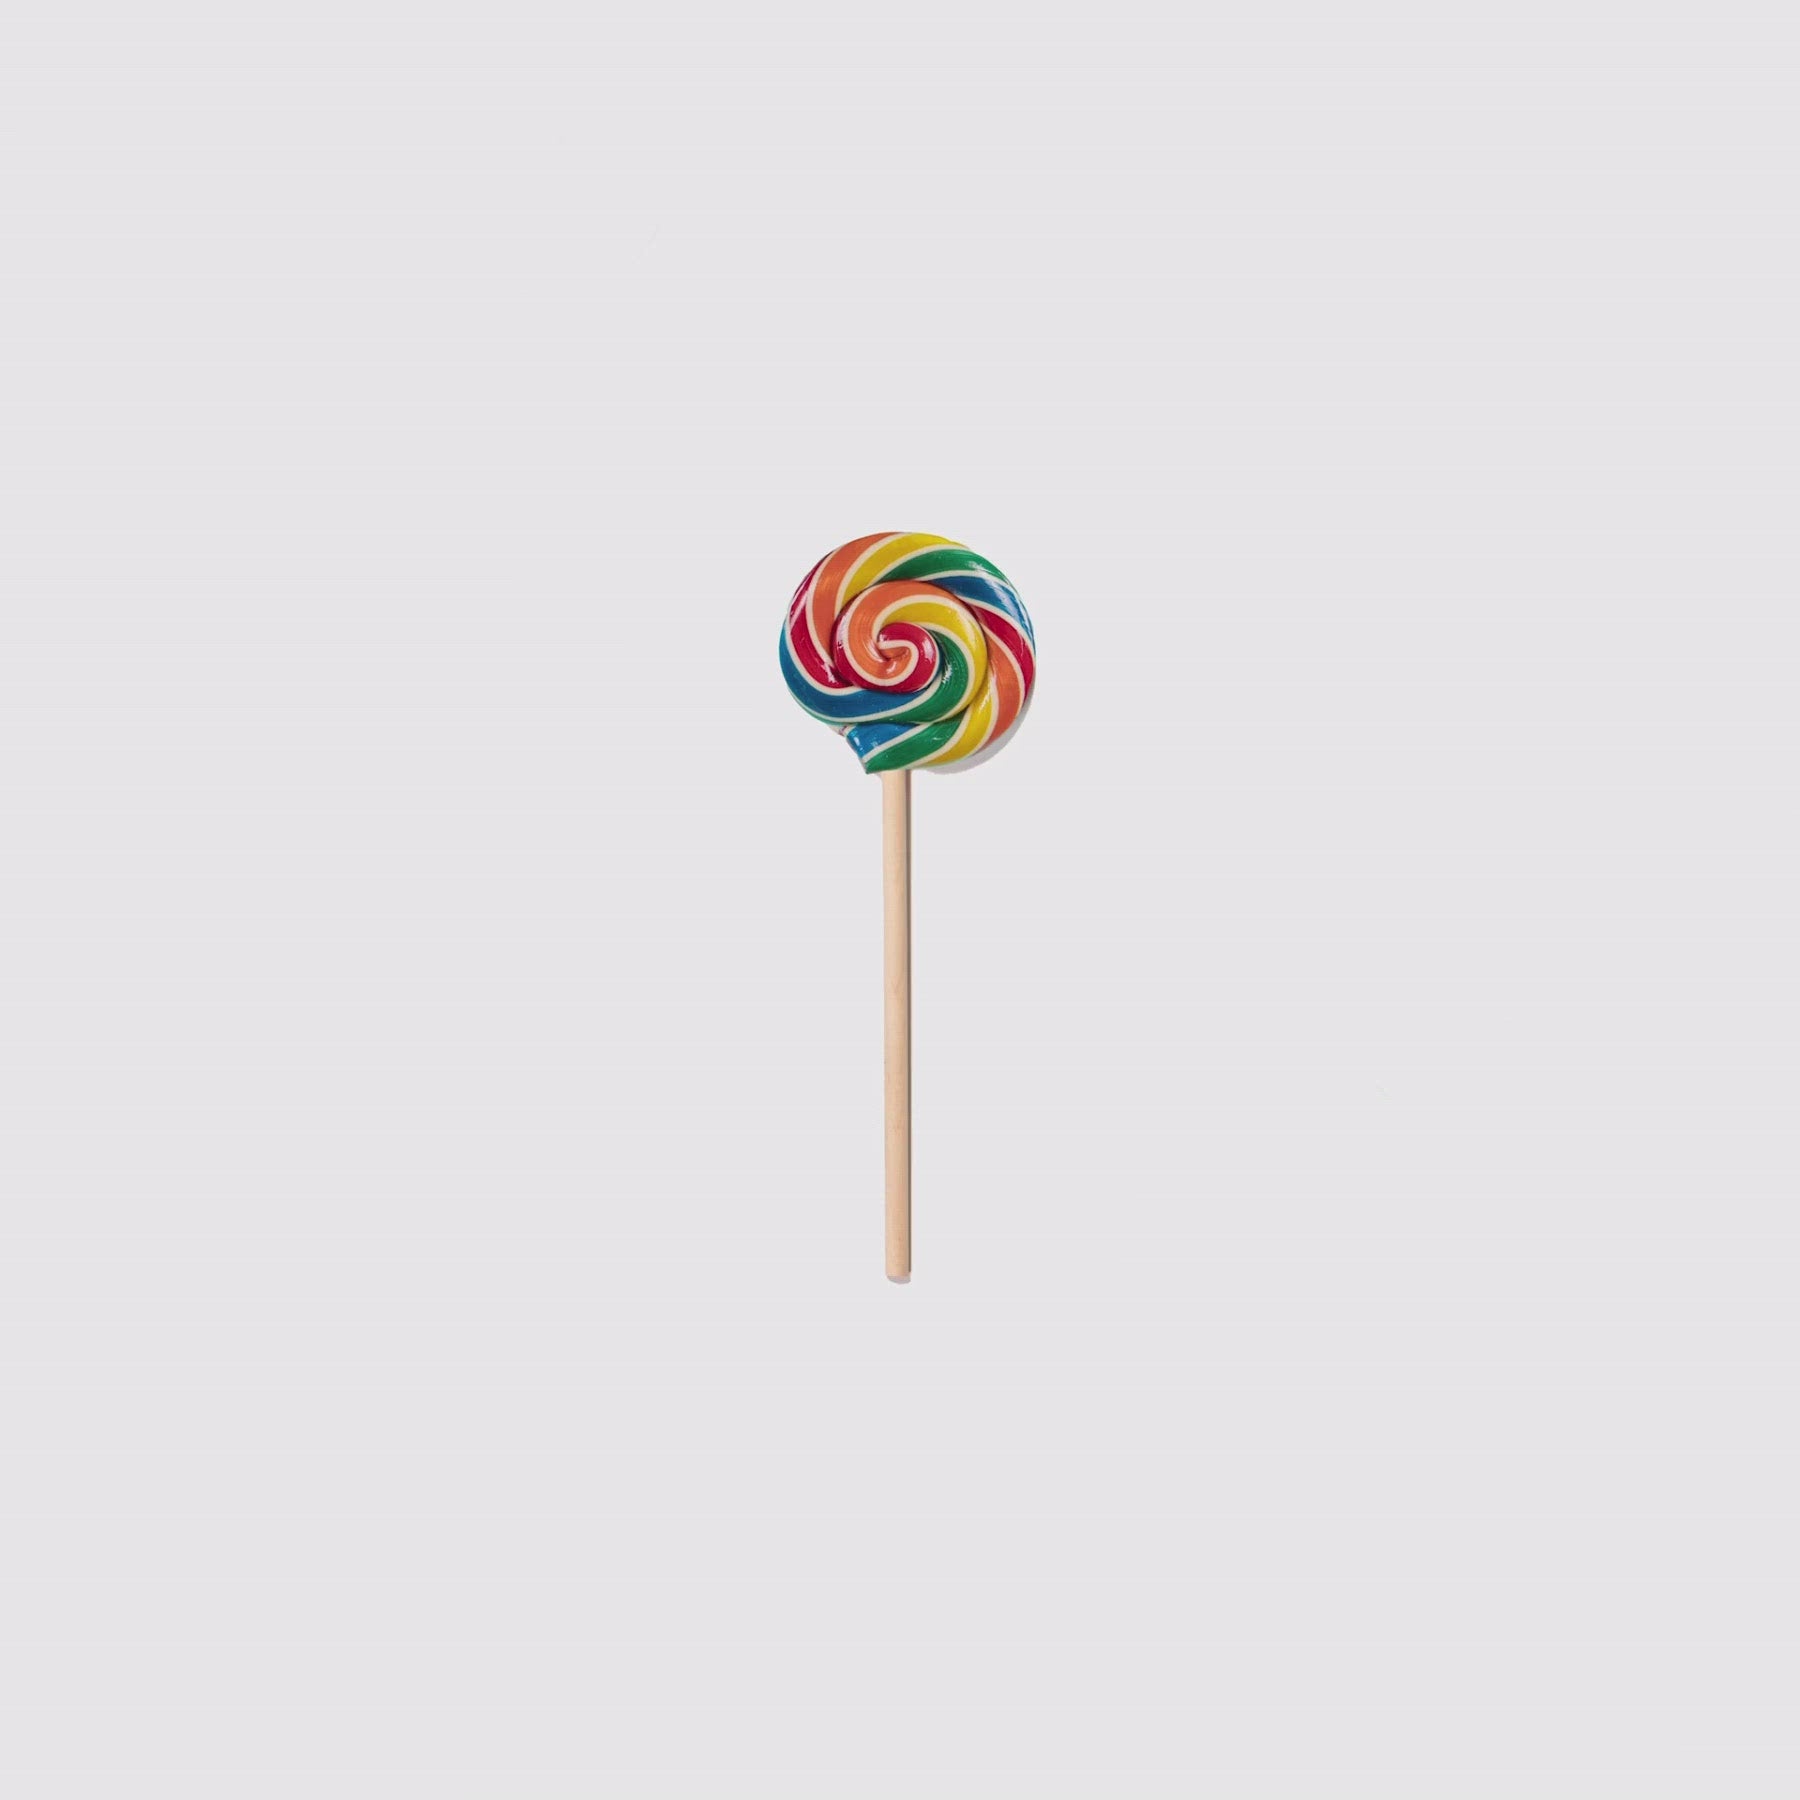 The Surprising Place The Name Lollipop Actually Came From